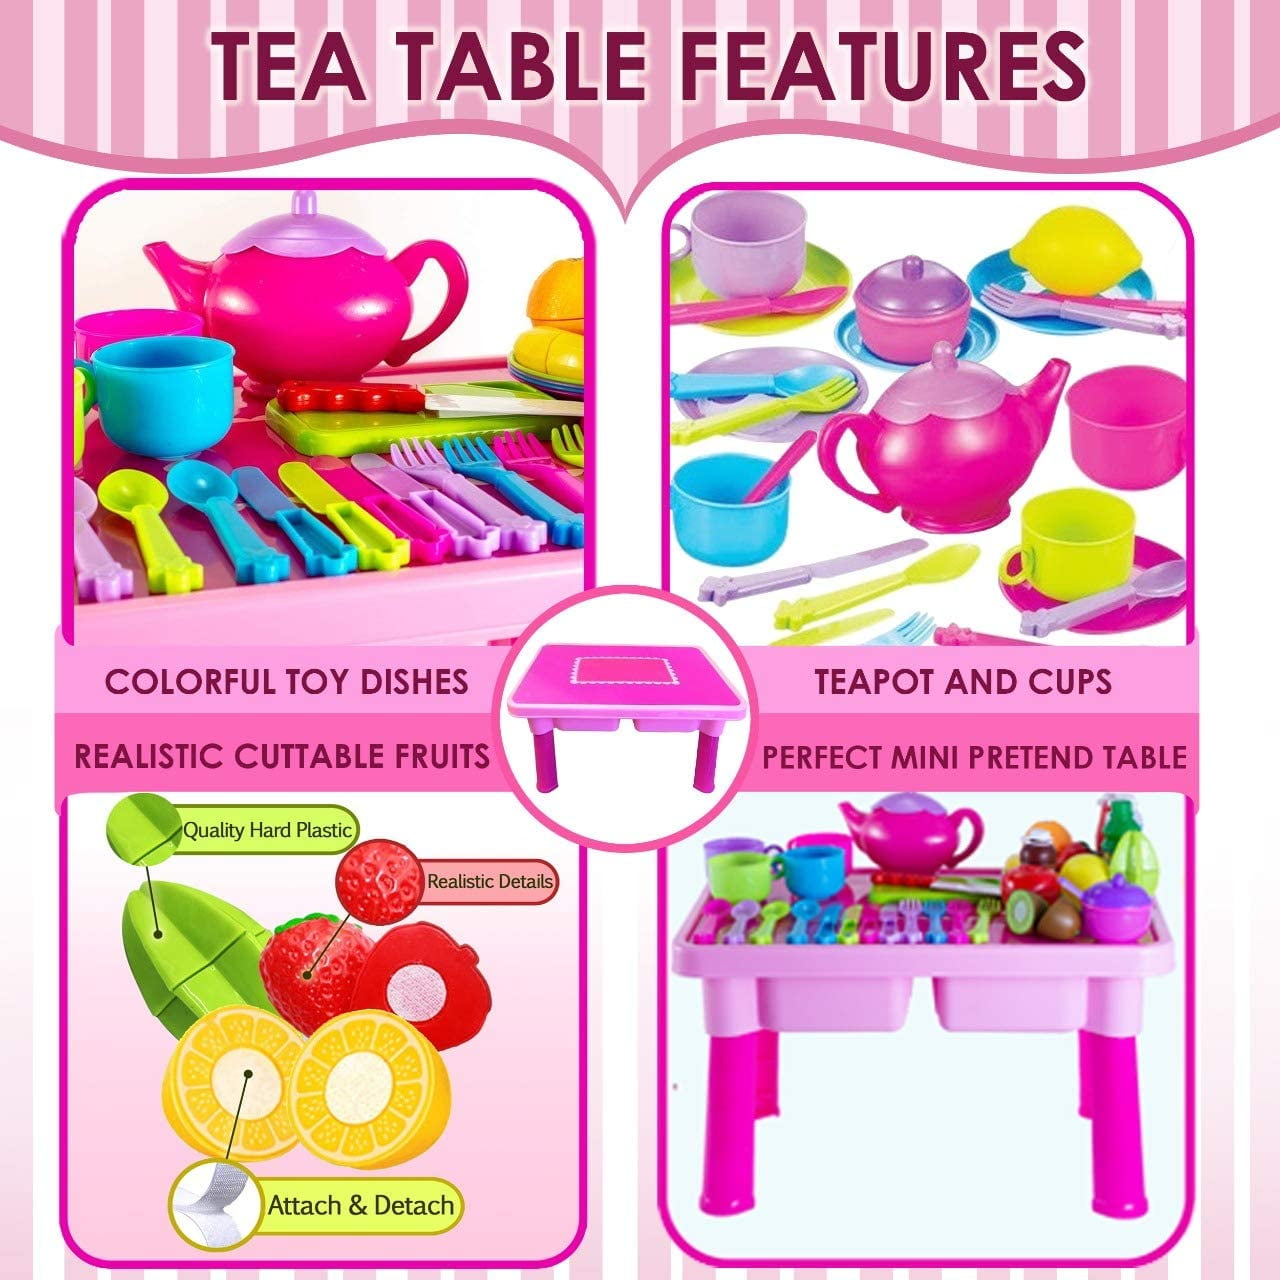 Cuttable Fruits Tea Set More Makes for sale online Play Food FUNERICA Pretend Table Toy Dishes 